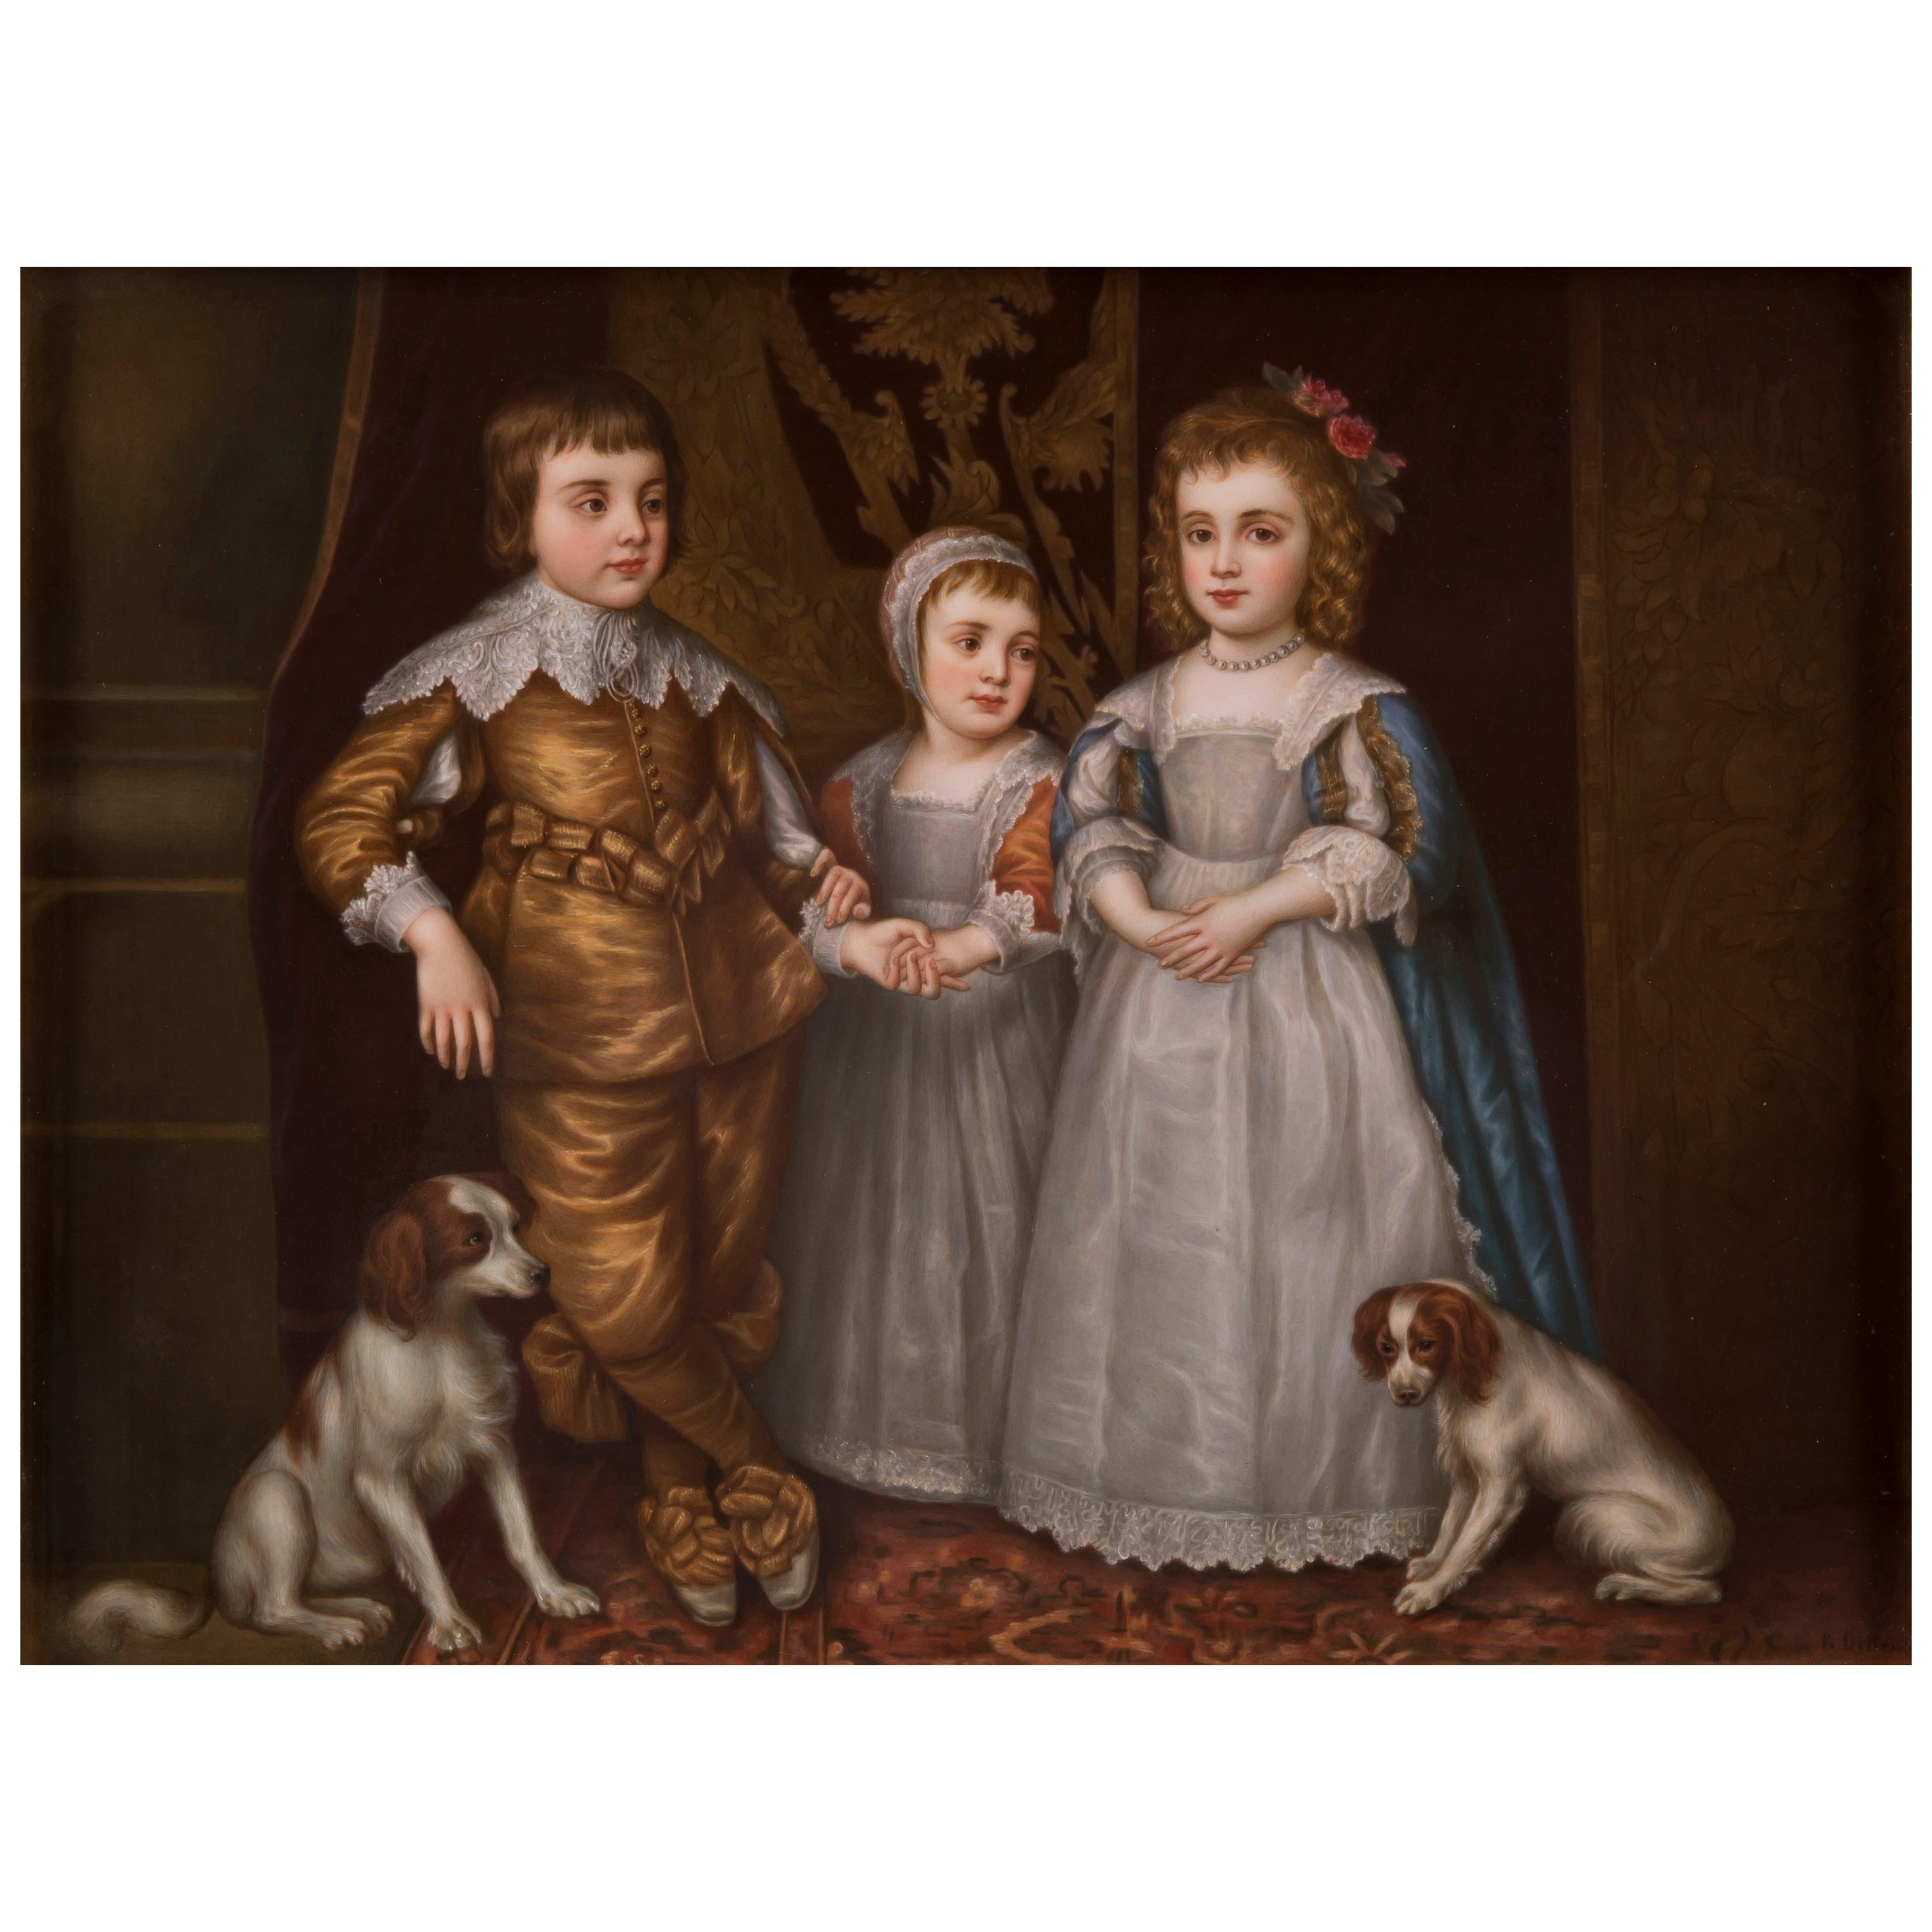 A KPM Porcelain Plaque After The Painting By Sir Anthony van Dyck, Circa 1890